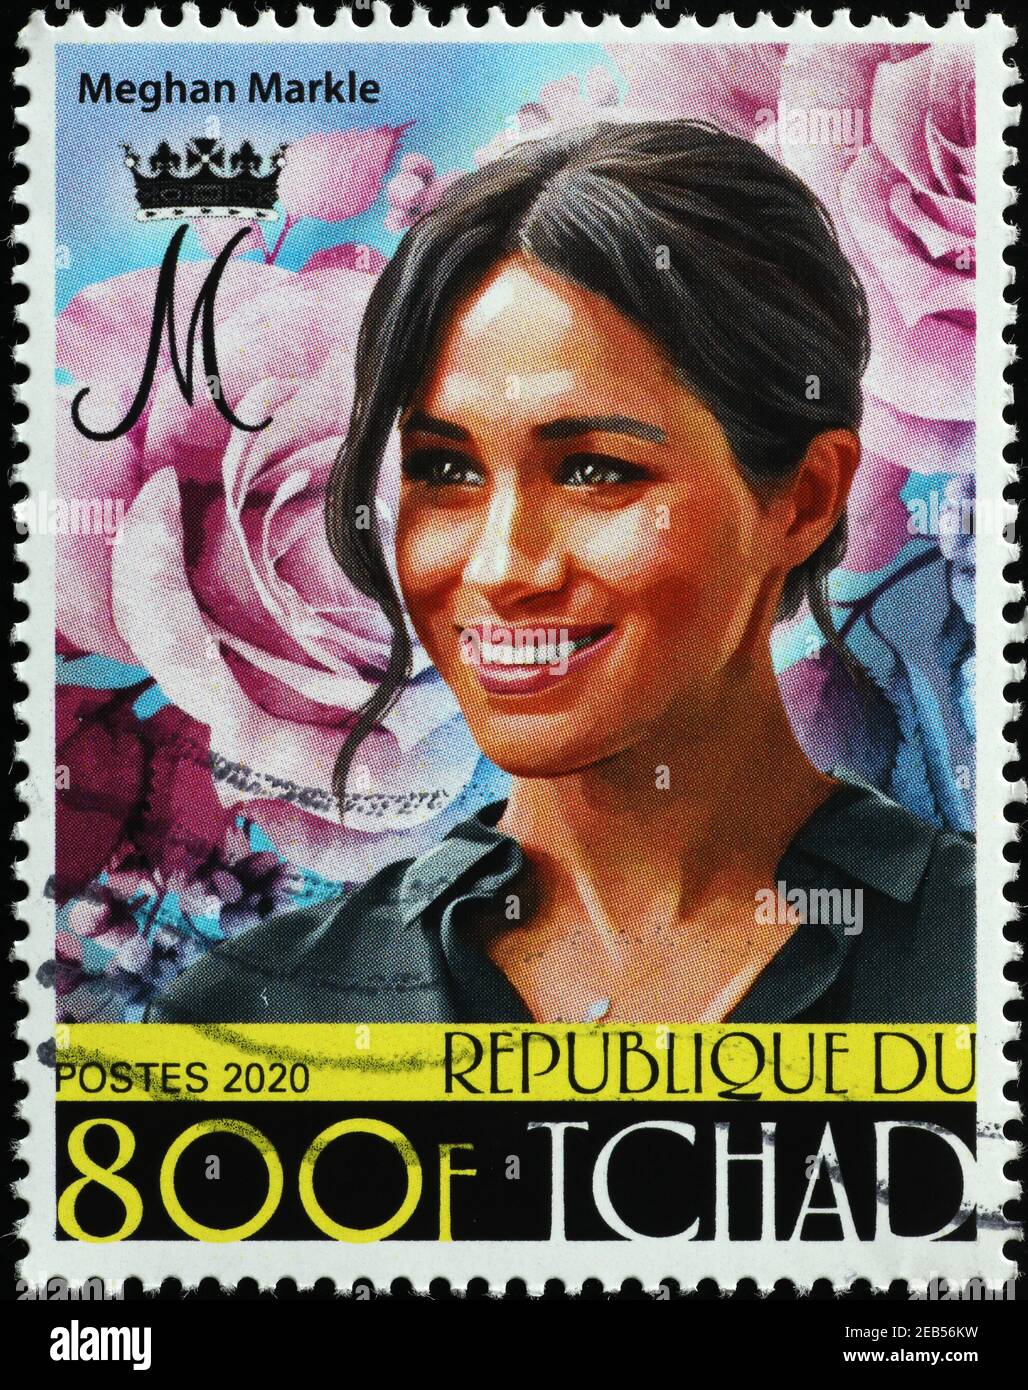 Meghan Markle on african postage stamp Stock Photo